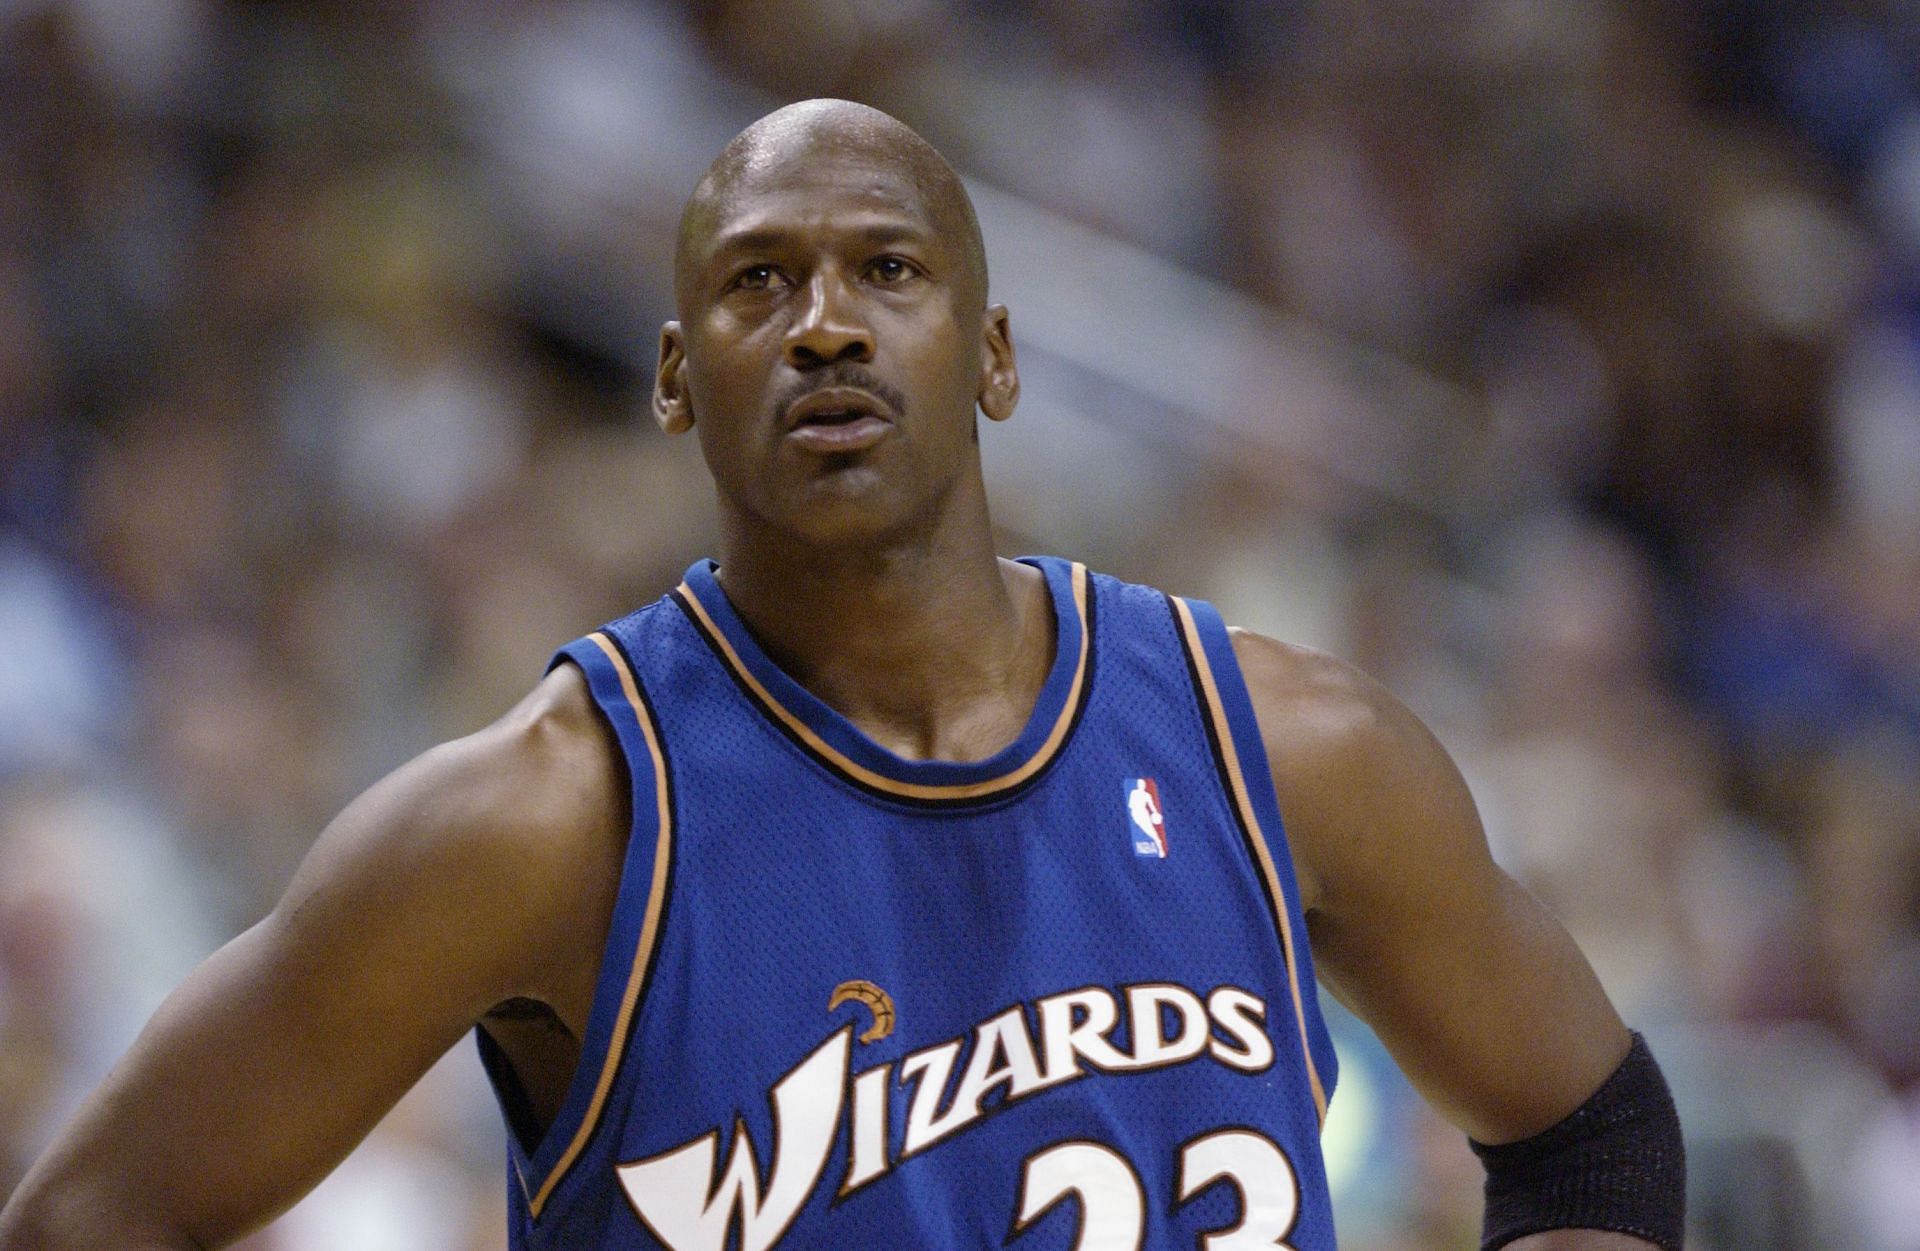 Michael Jordan last played for the Washington Wizards in 2003.